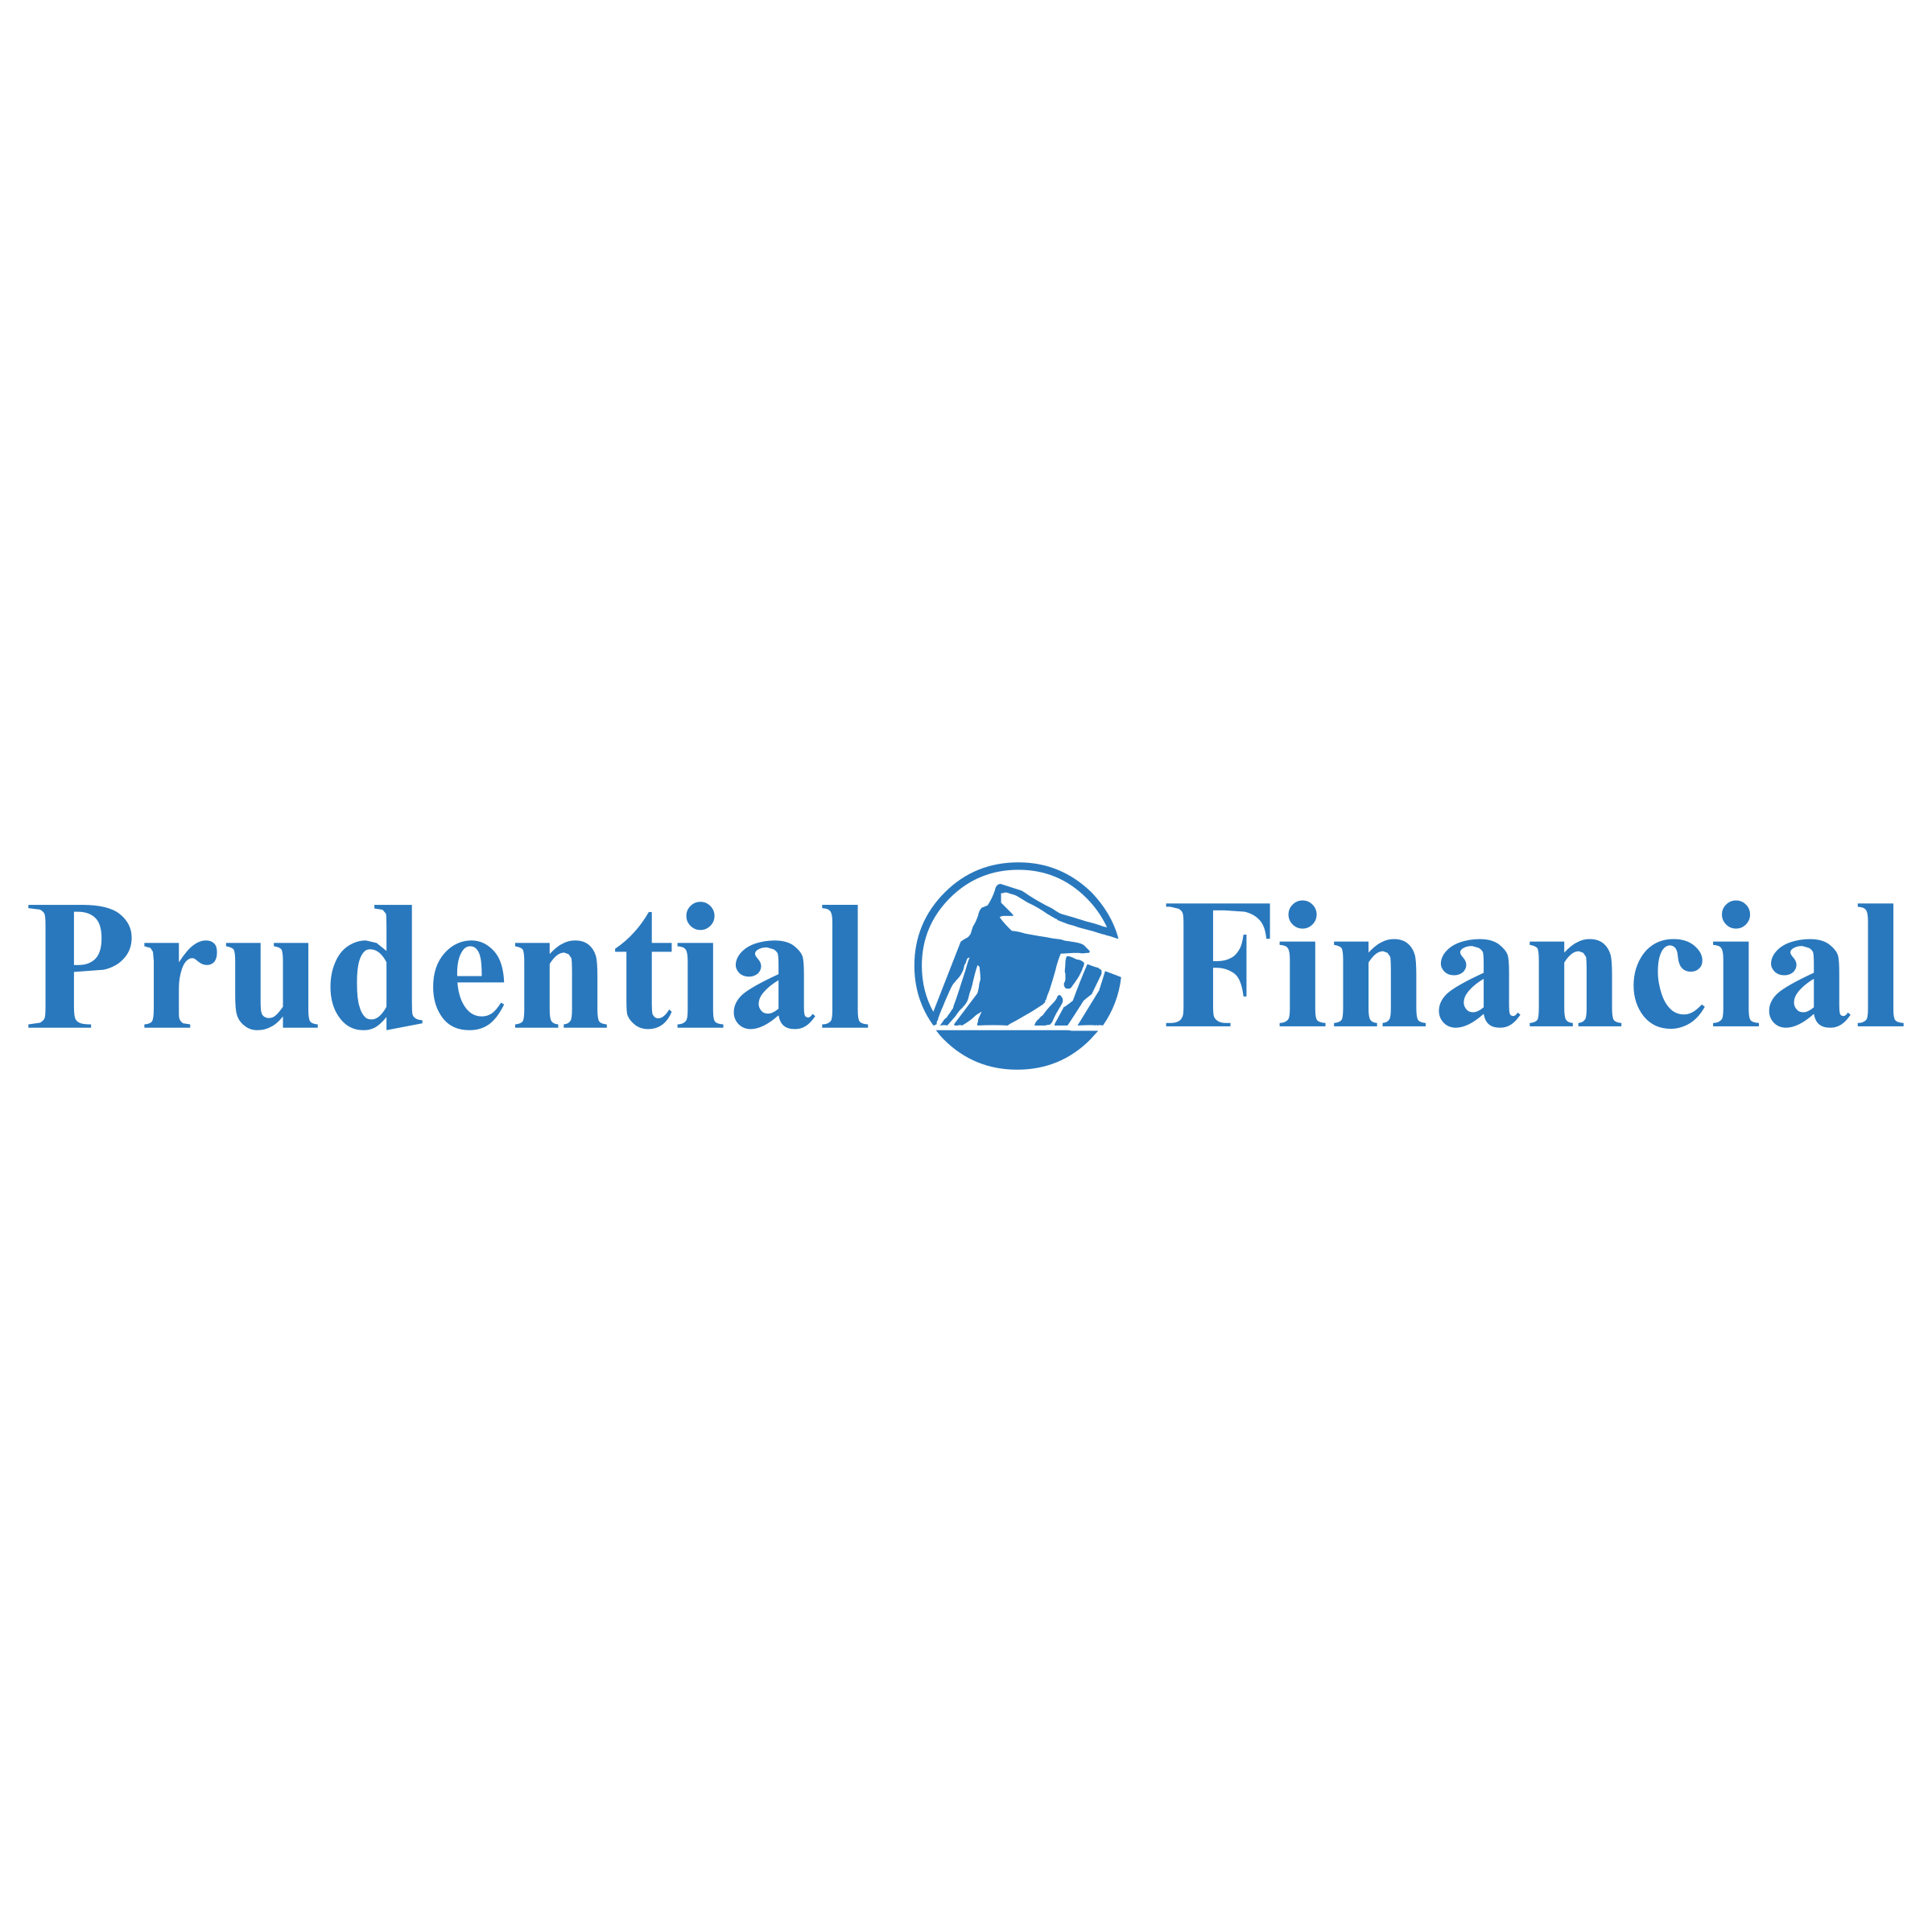 Prudential Logo Vector At Collection Of Prudential Logo Vector Free For 2800